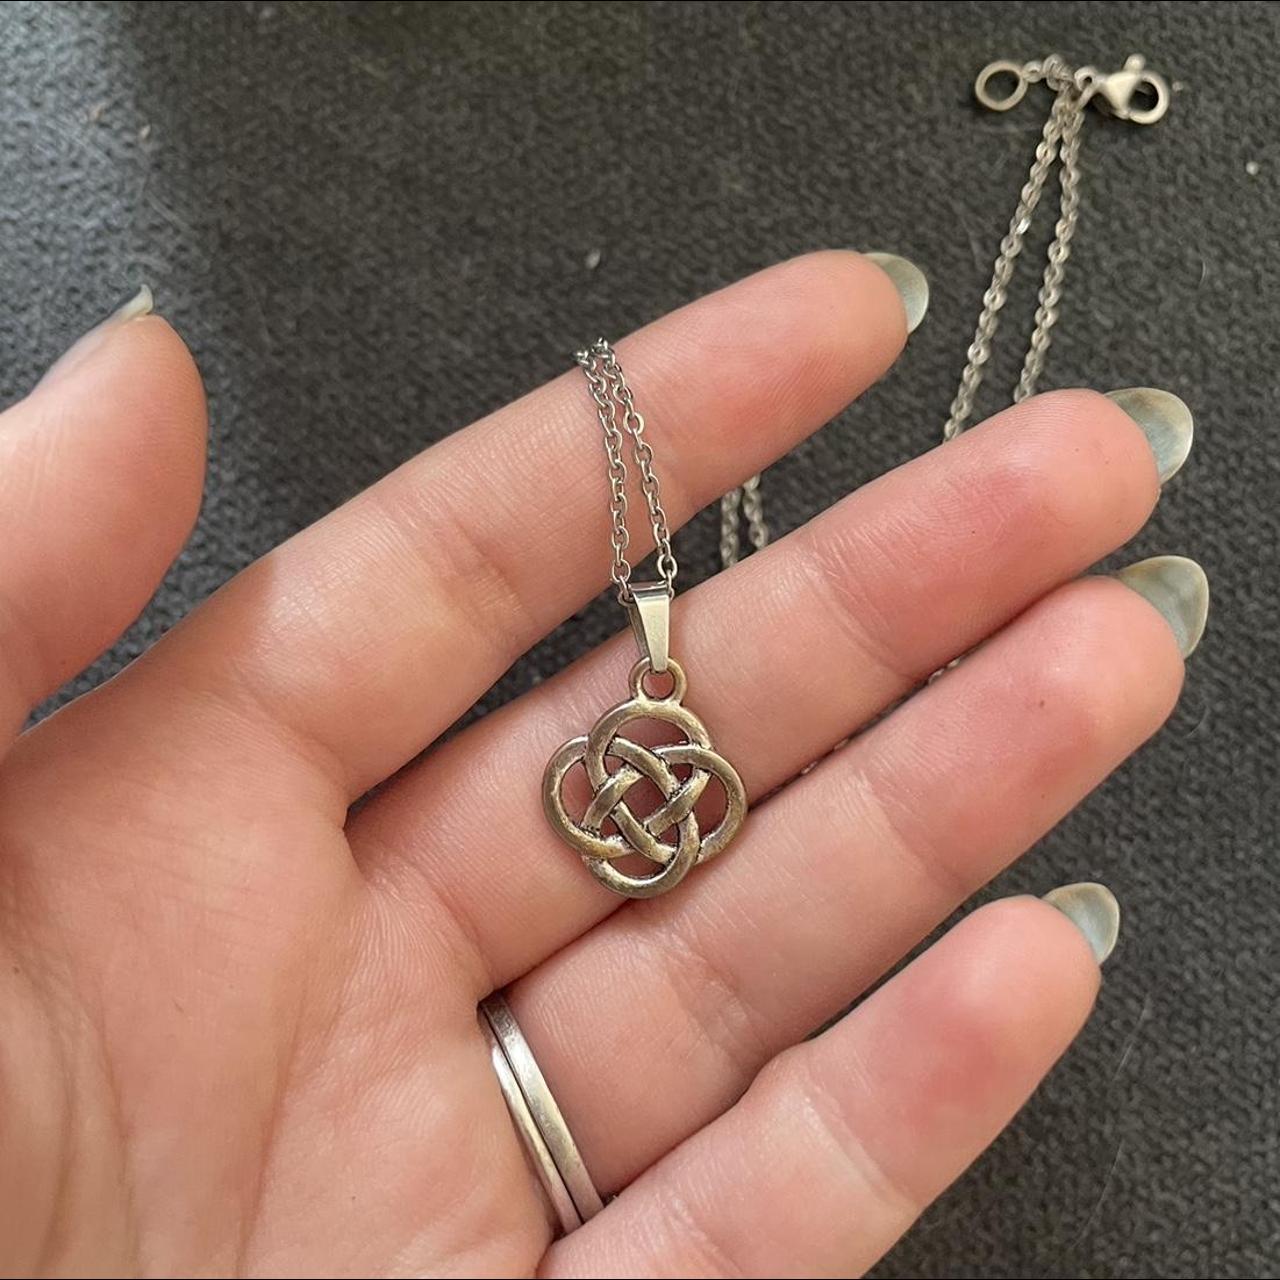 3D Printable Celtic Love Knot by Dan O'Connell